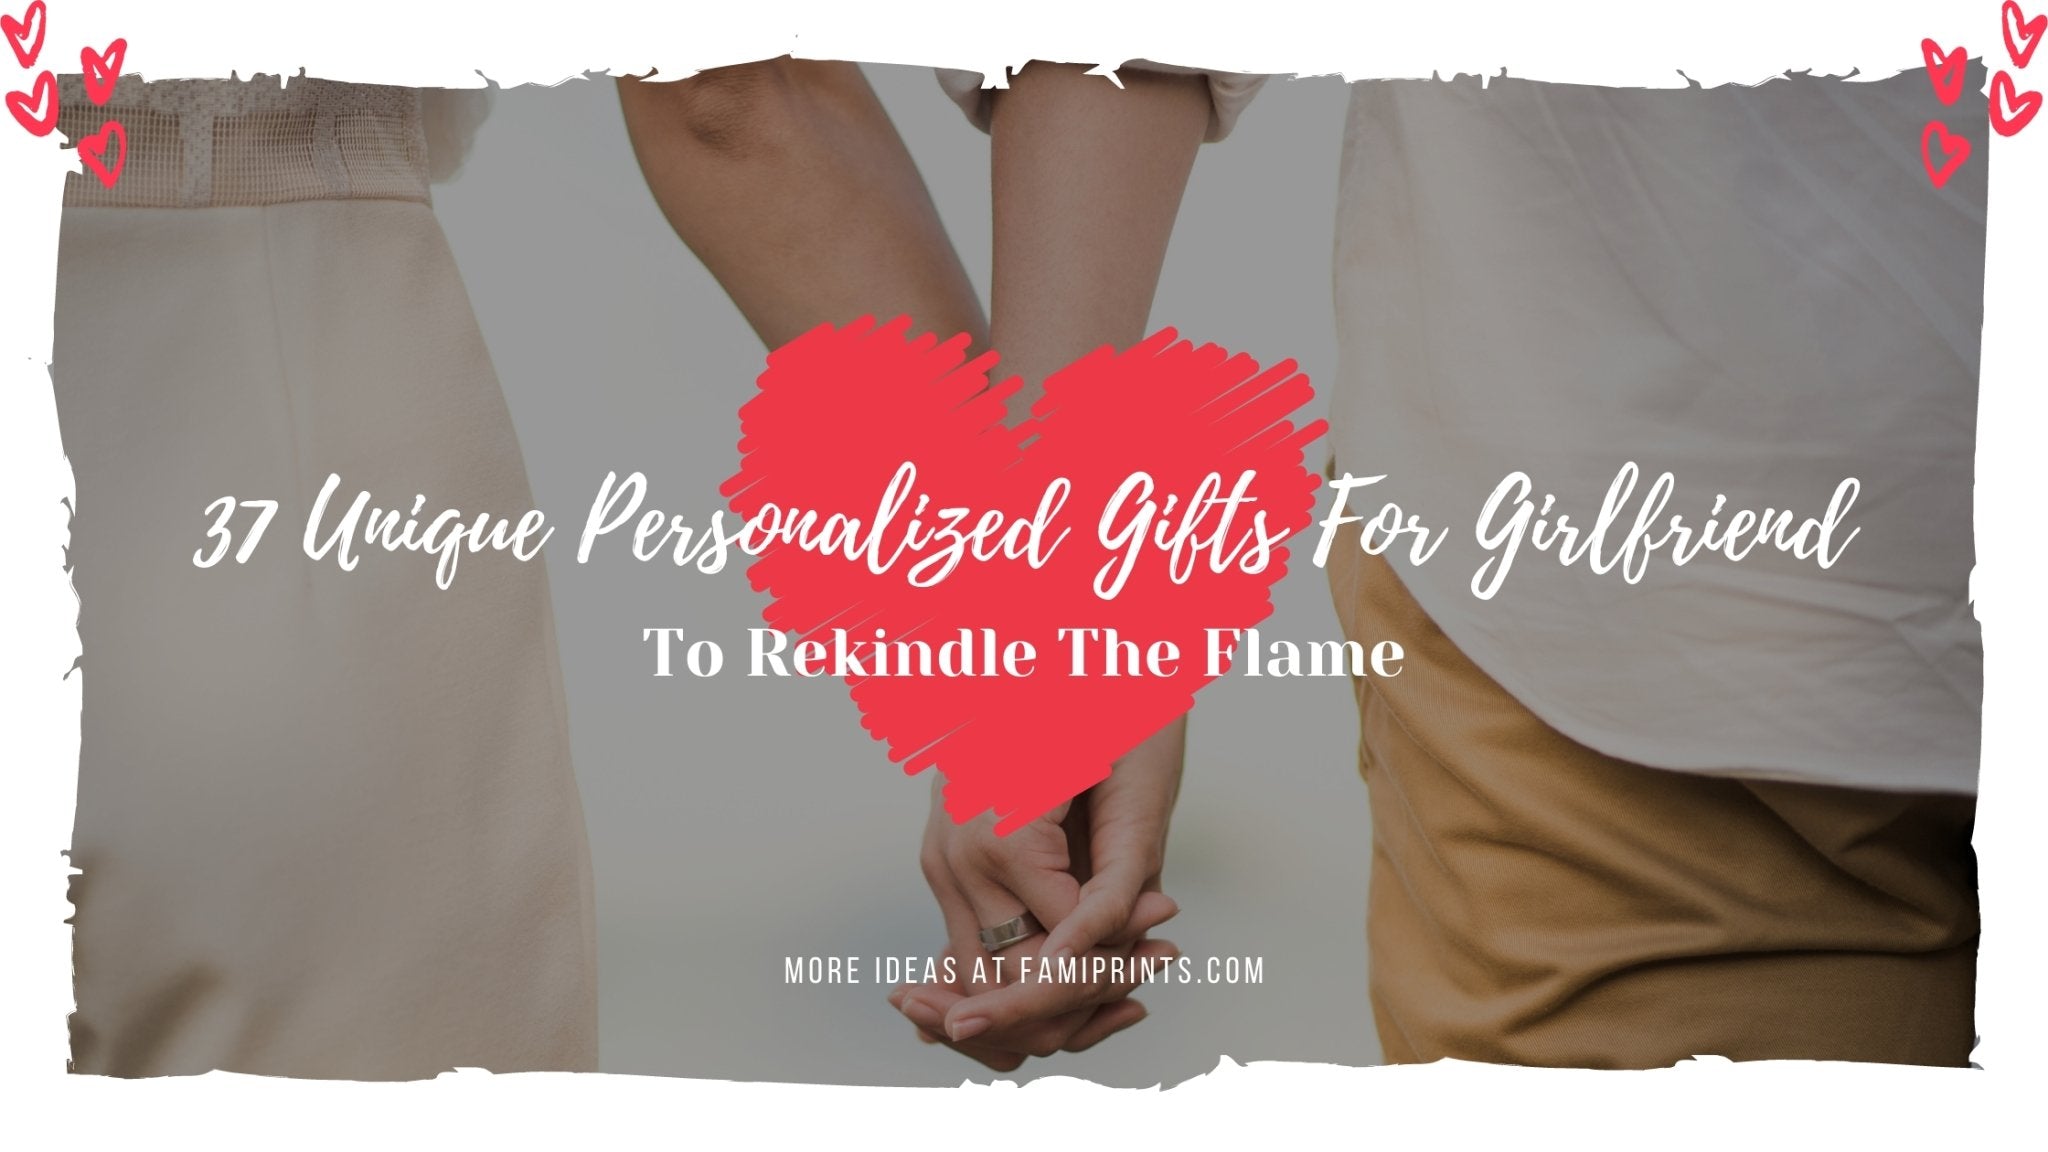 37 Unique Personalized Gifts For Girlfriend To Rekindle The Flame - FamiPrints | Trending Customizable Family Gifts